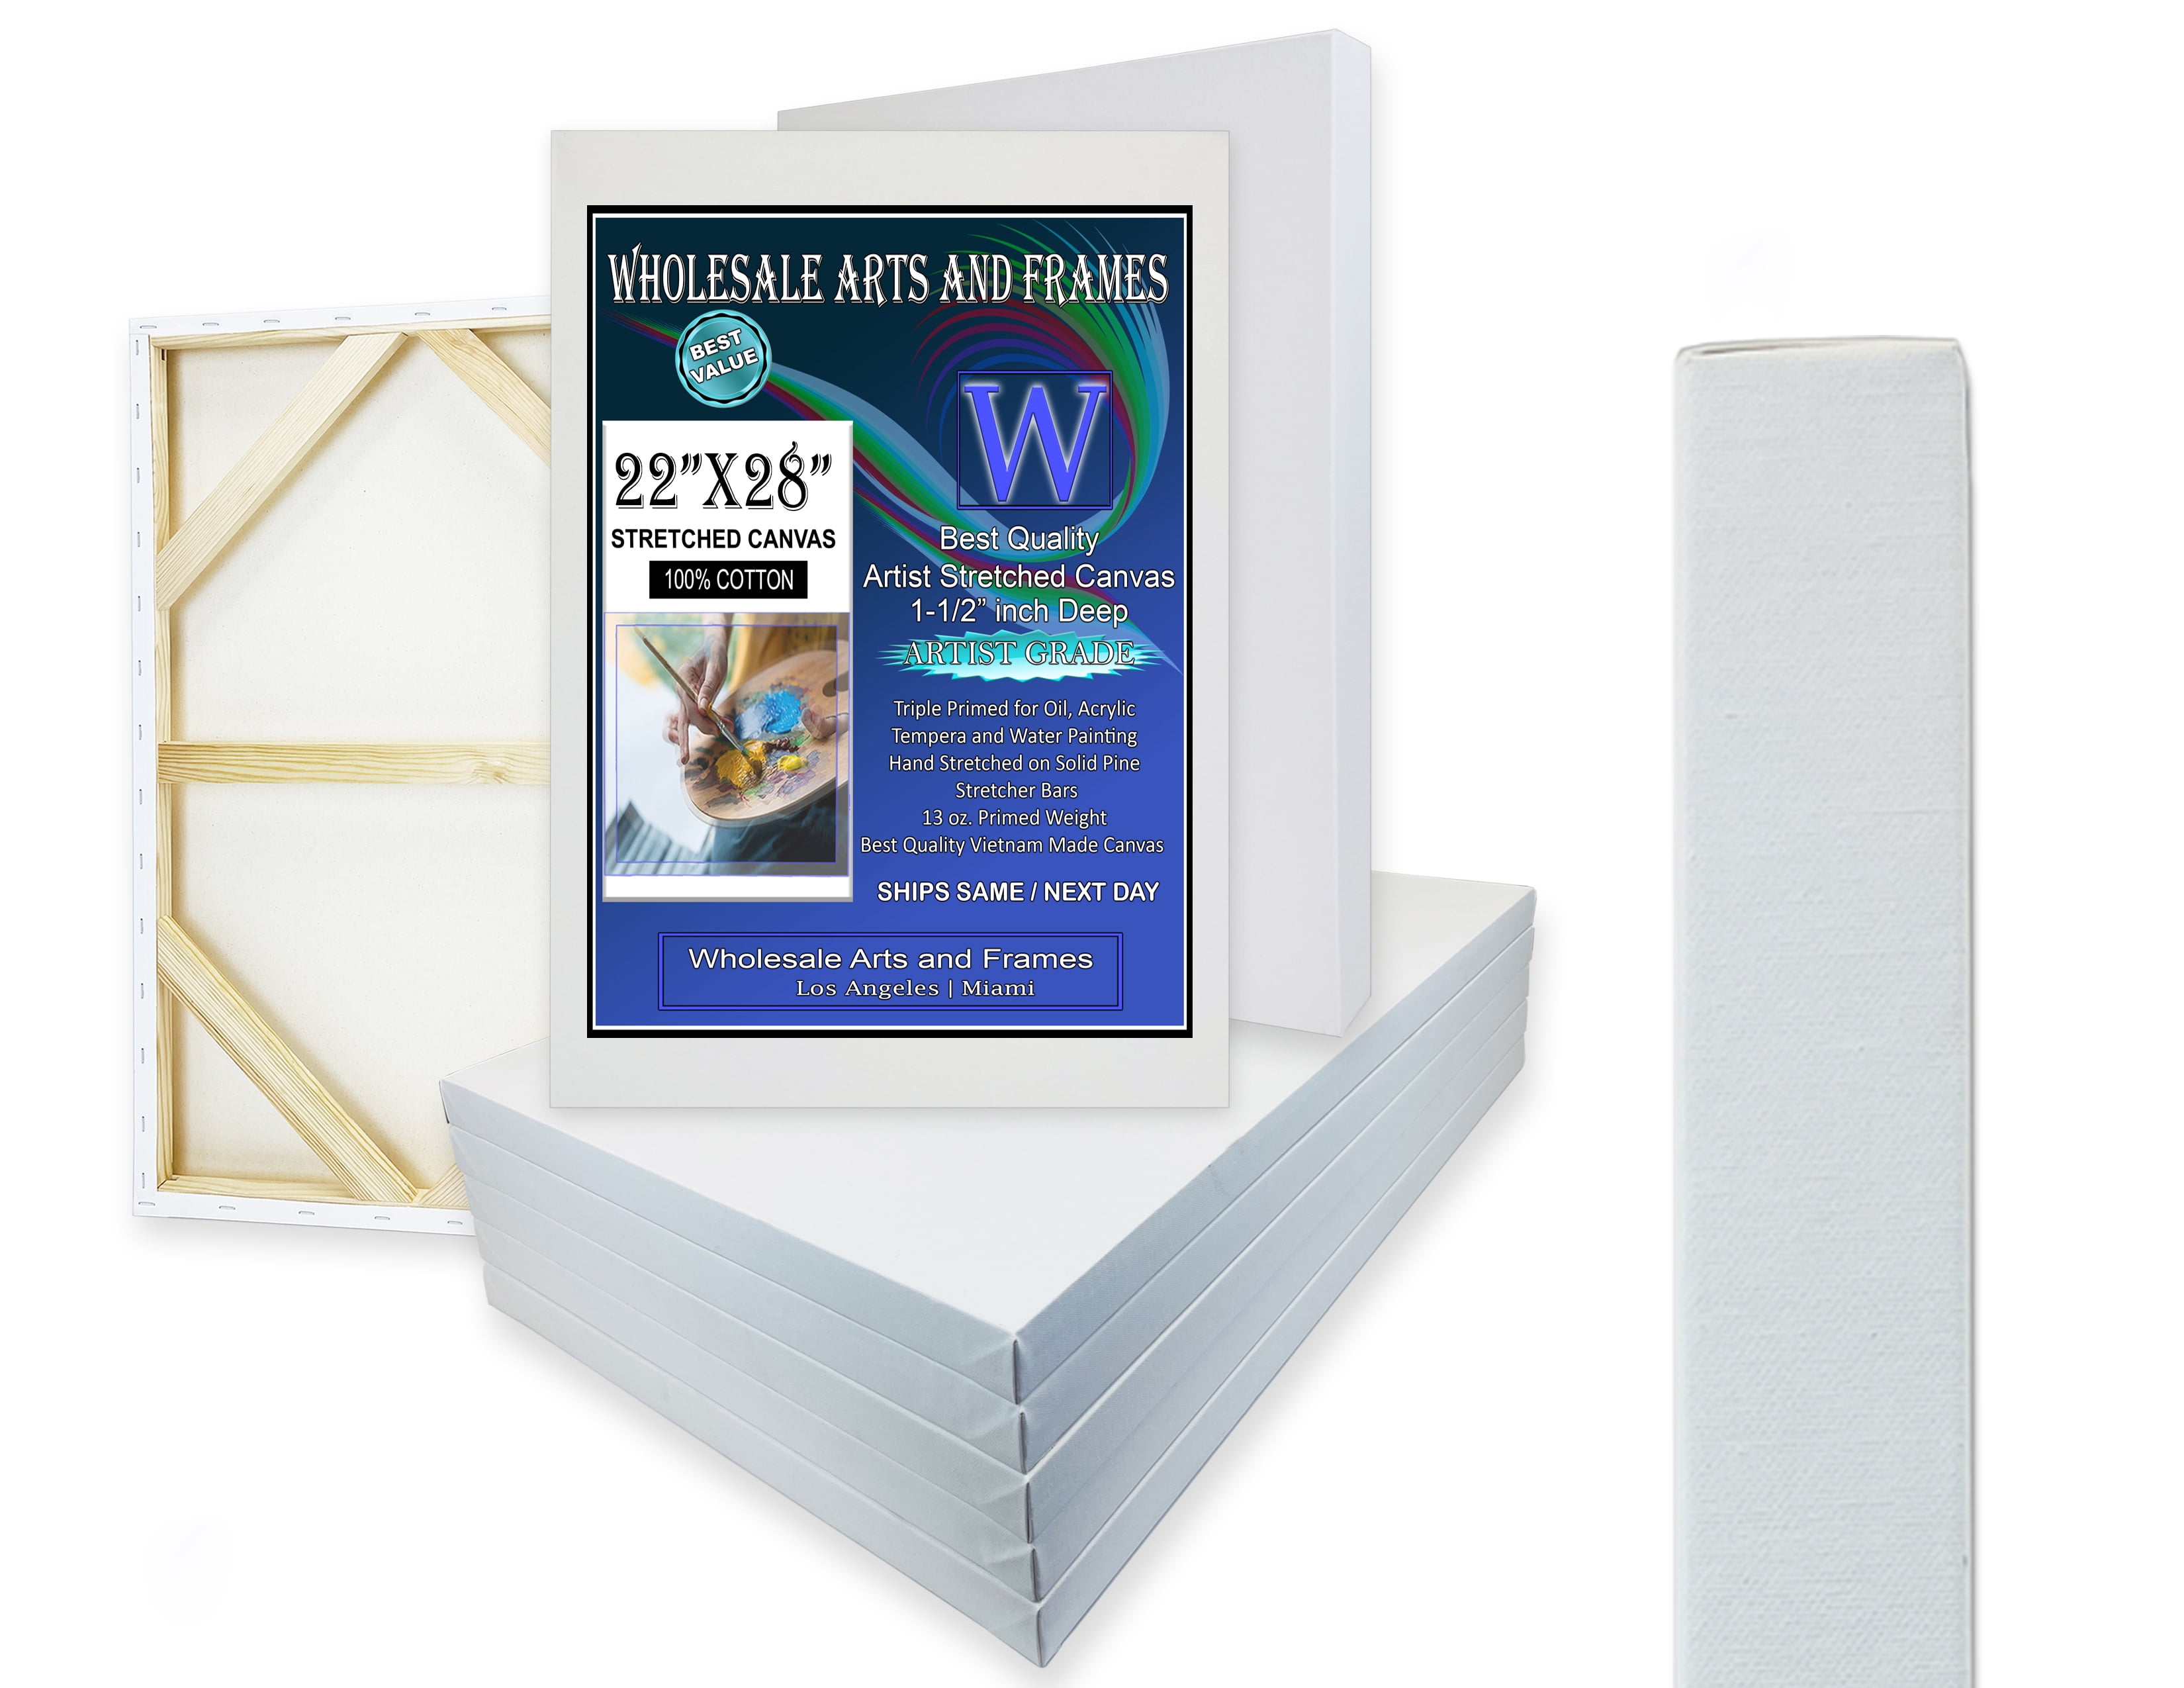 PHOENIX Watercolor Canvas Panels 9x12 Inch, 6 Pack - 8 Oz Triple Primed  100% Cotton Acid Free Canvases for Painting, Blank Flat Canvas Boards for